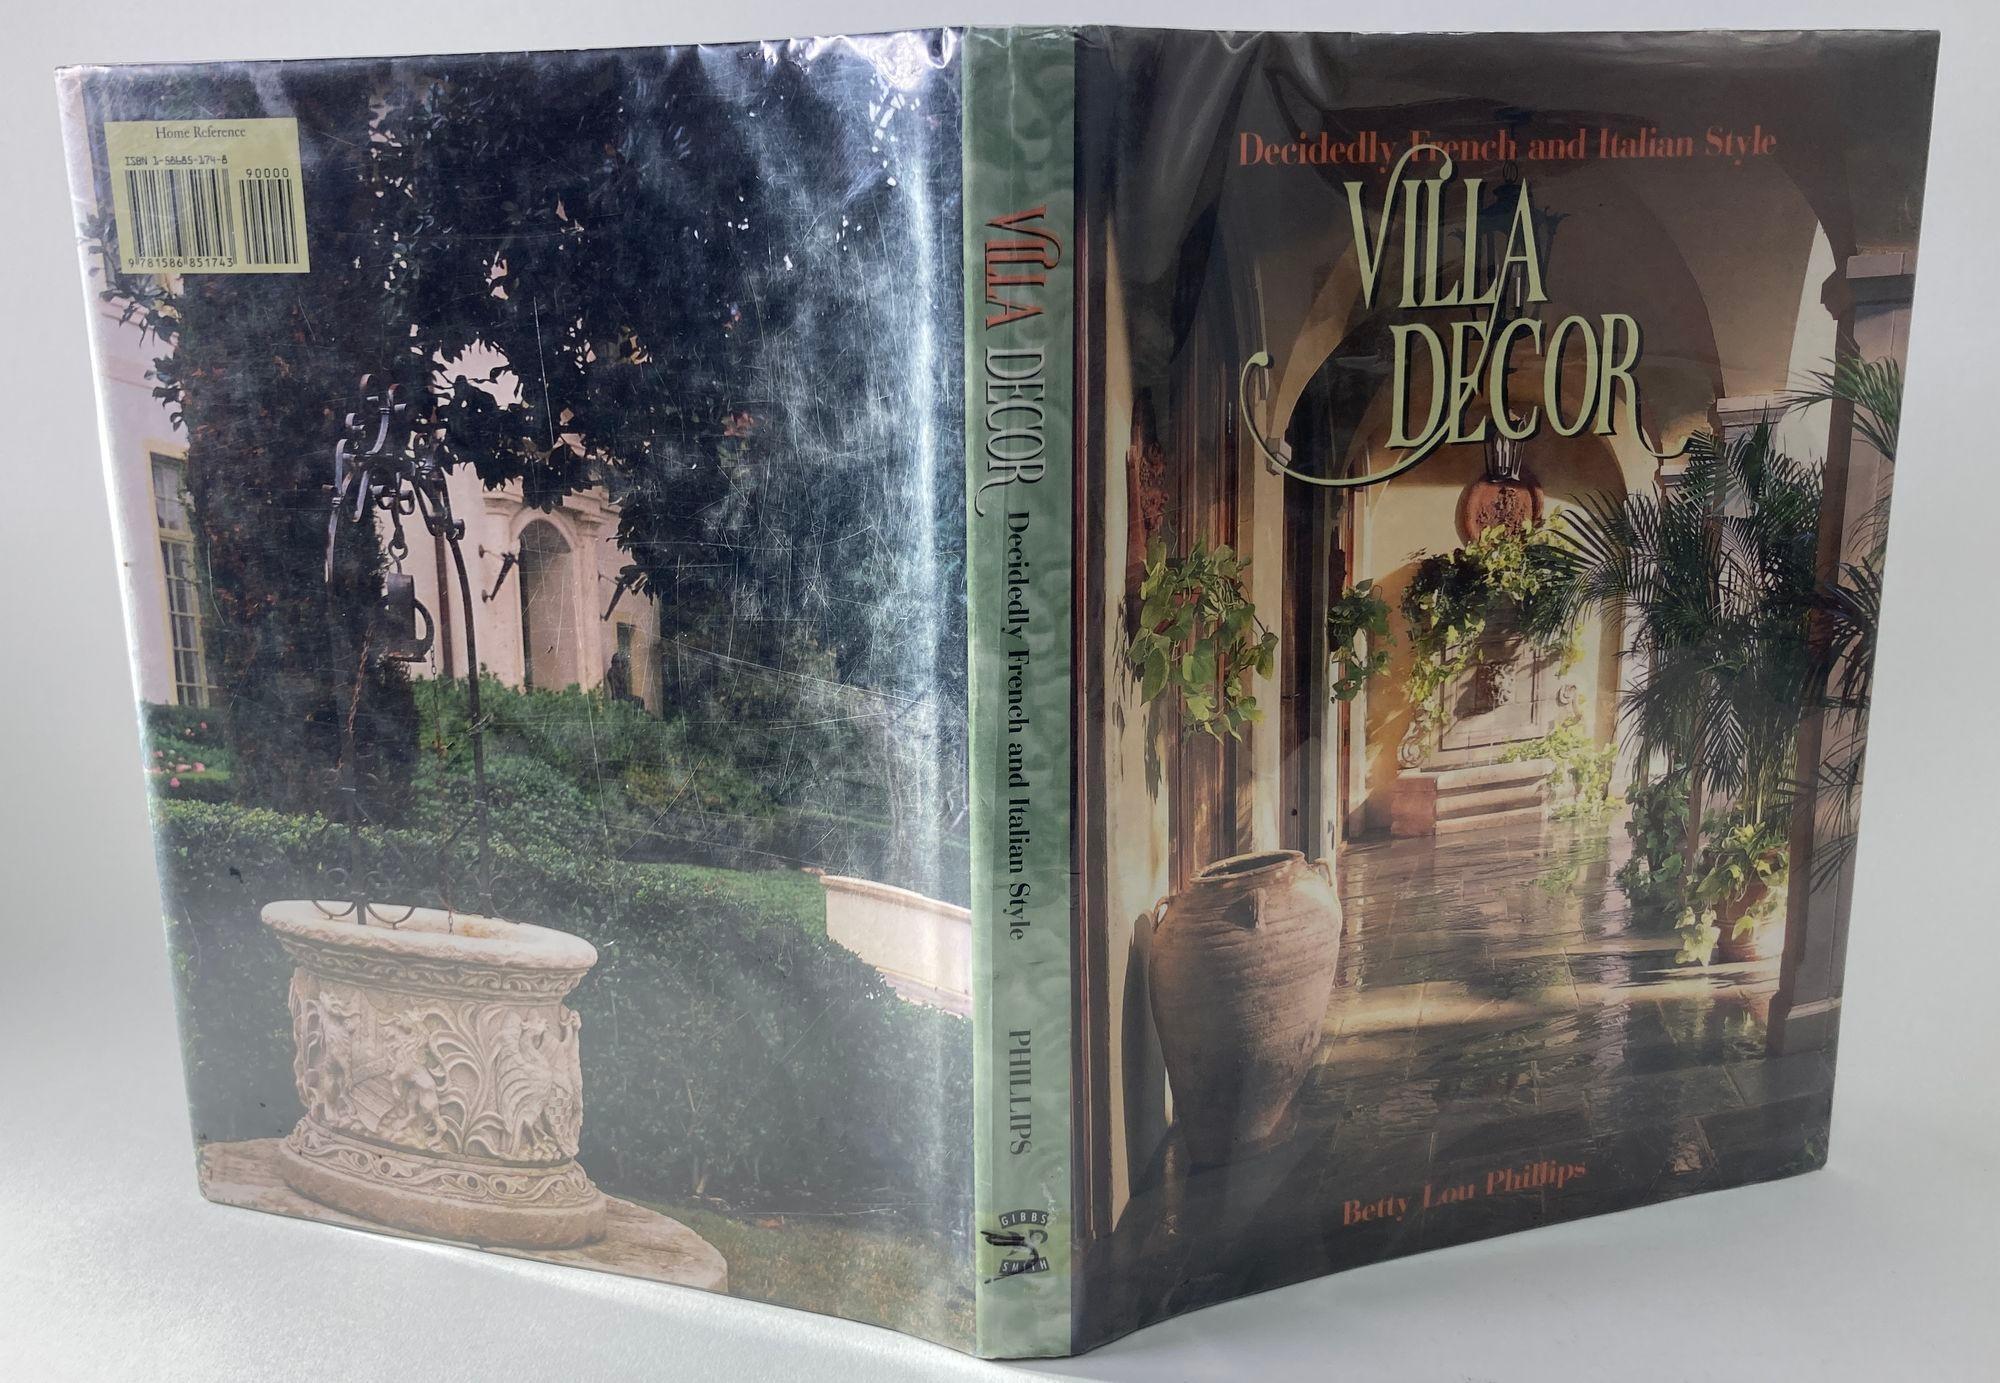 Papier Décoration VILLA : Decidedly French and Italian Style Hardcover by Betty Lou Phillips en vente